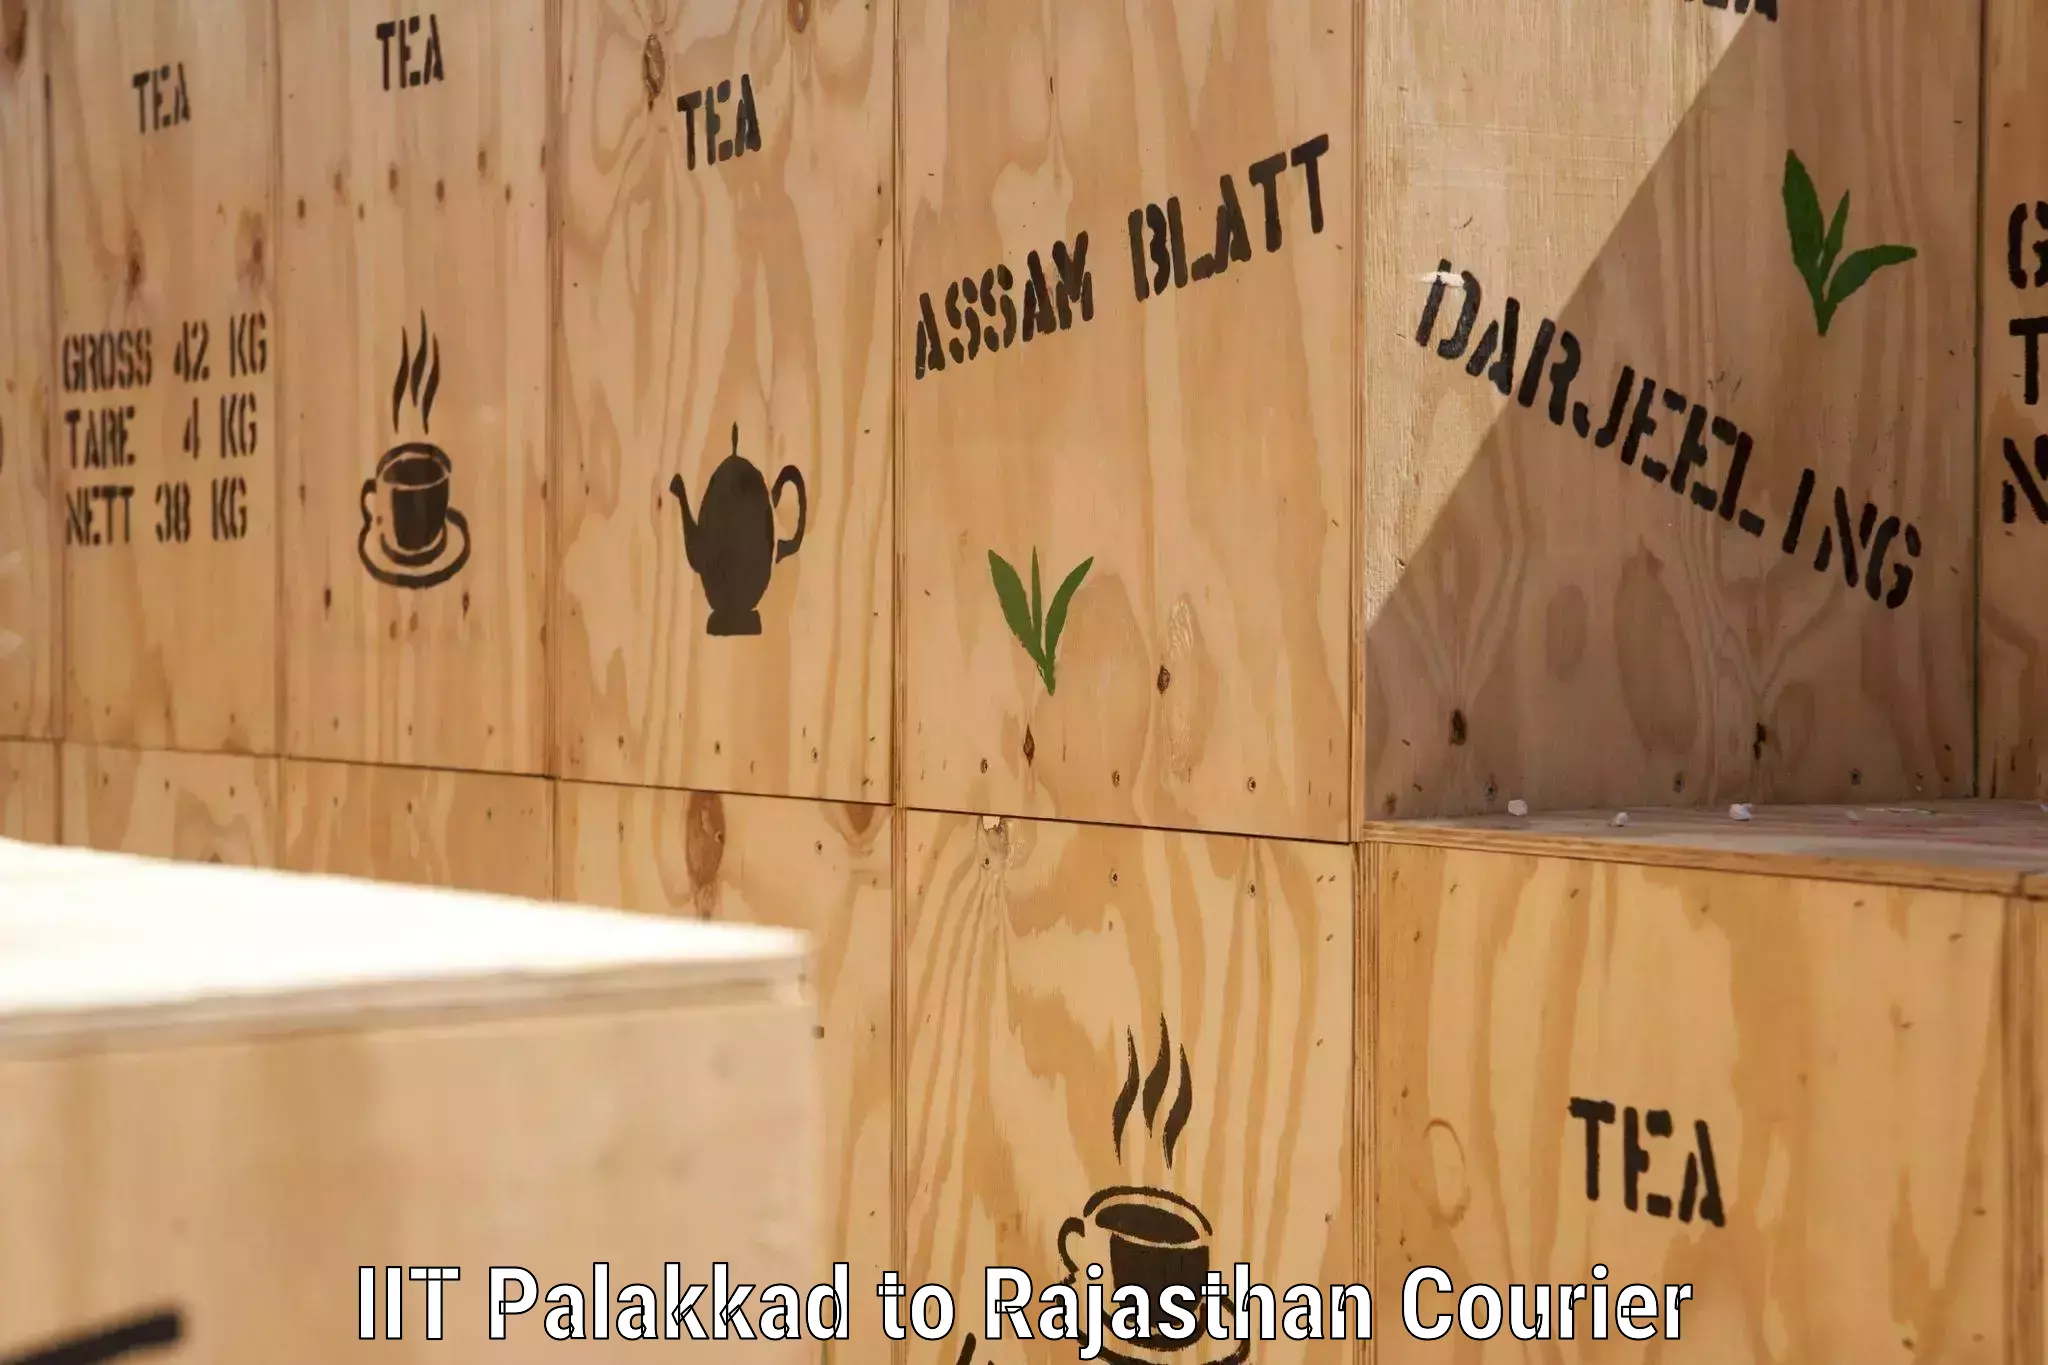 Next-day delivery options IIT Palakkad to Rajasthan